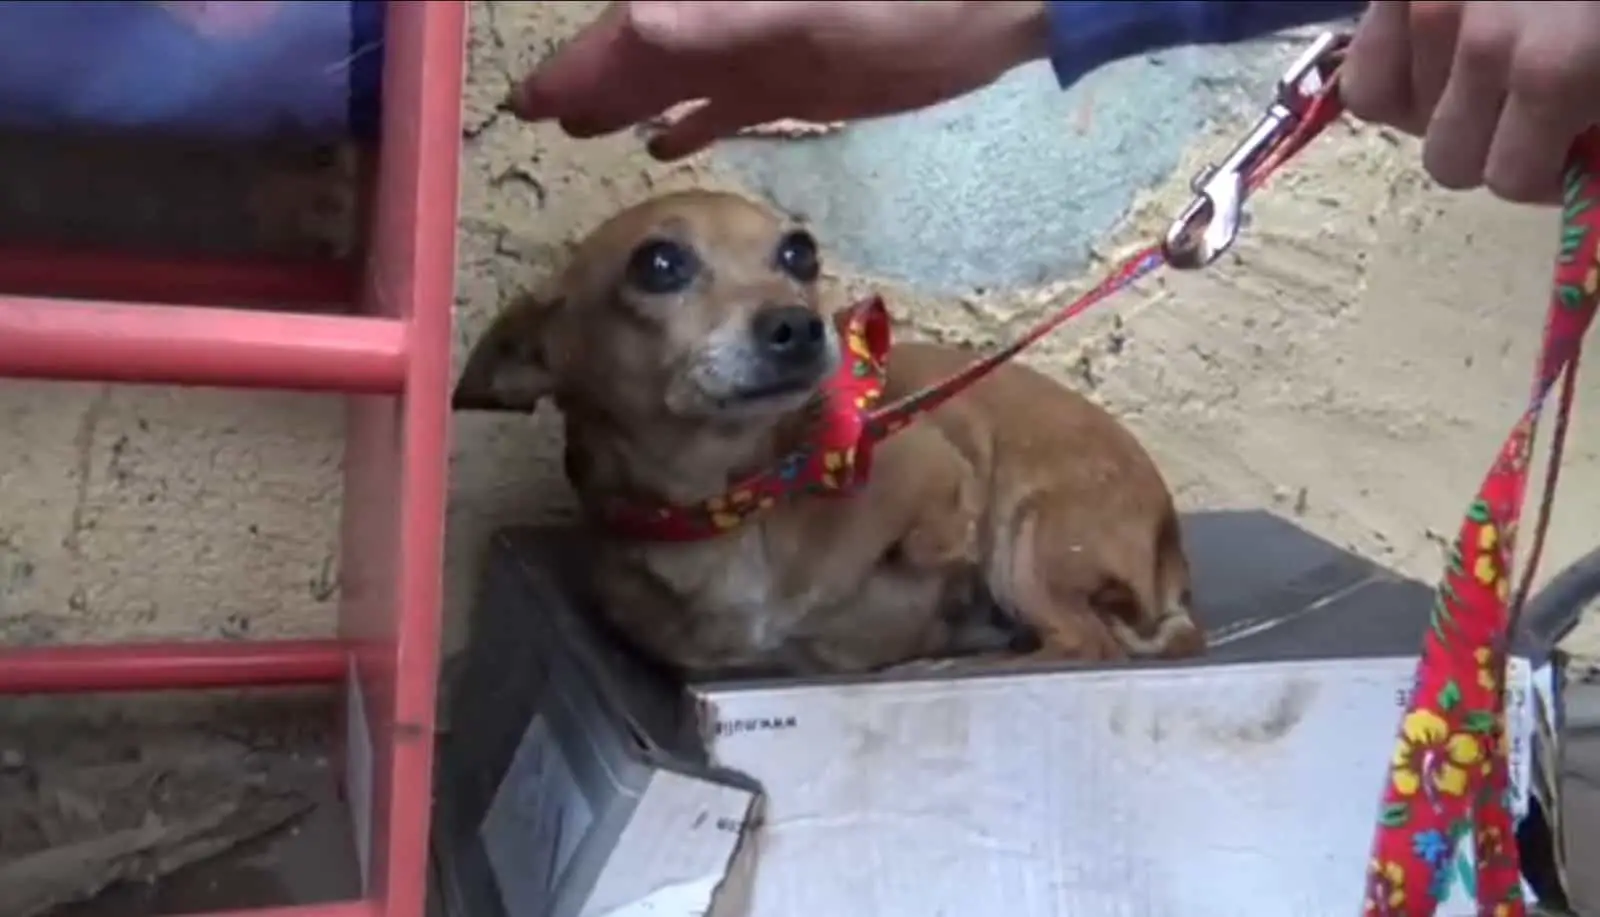 The homeowners eventually noticed her and provided just enough food to keep her alive. This continued for several weeks before they contacted two animal shelters for assistance.